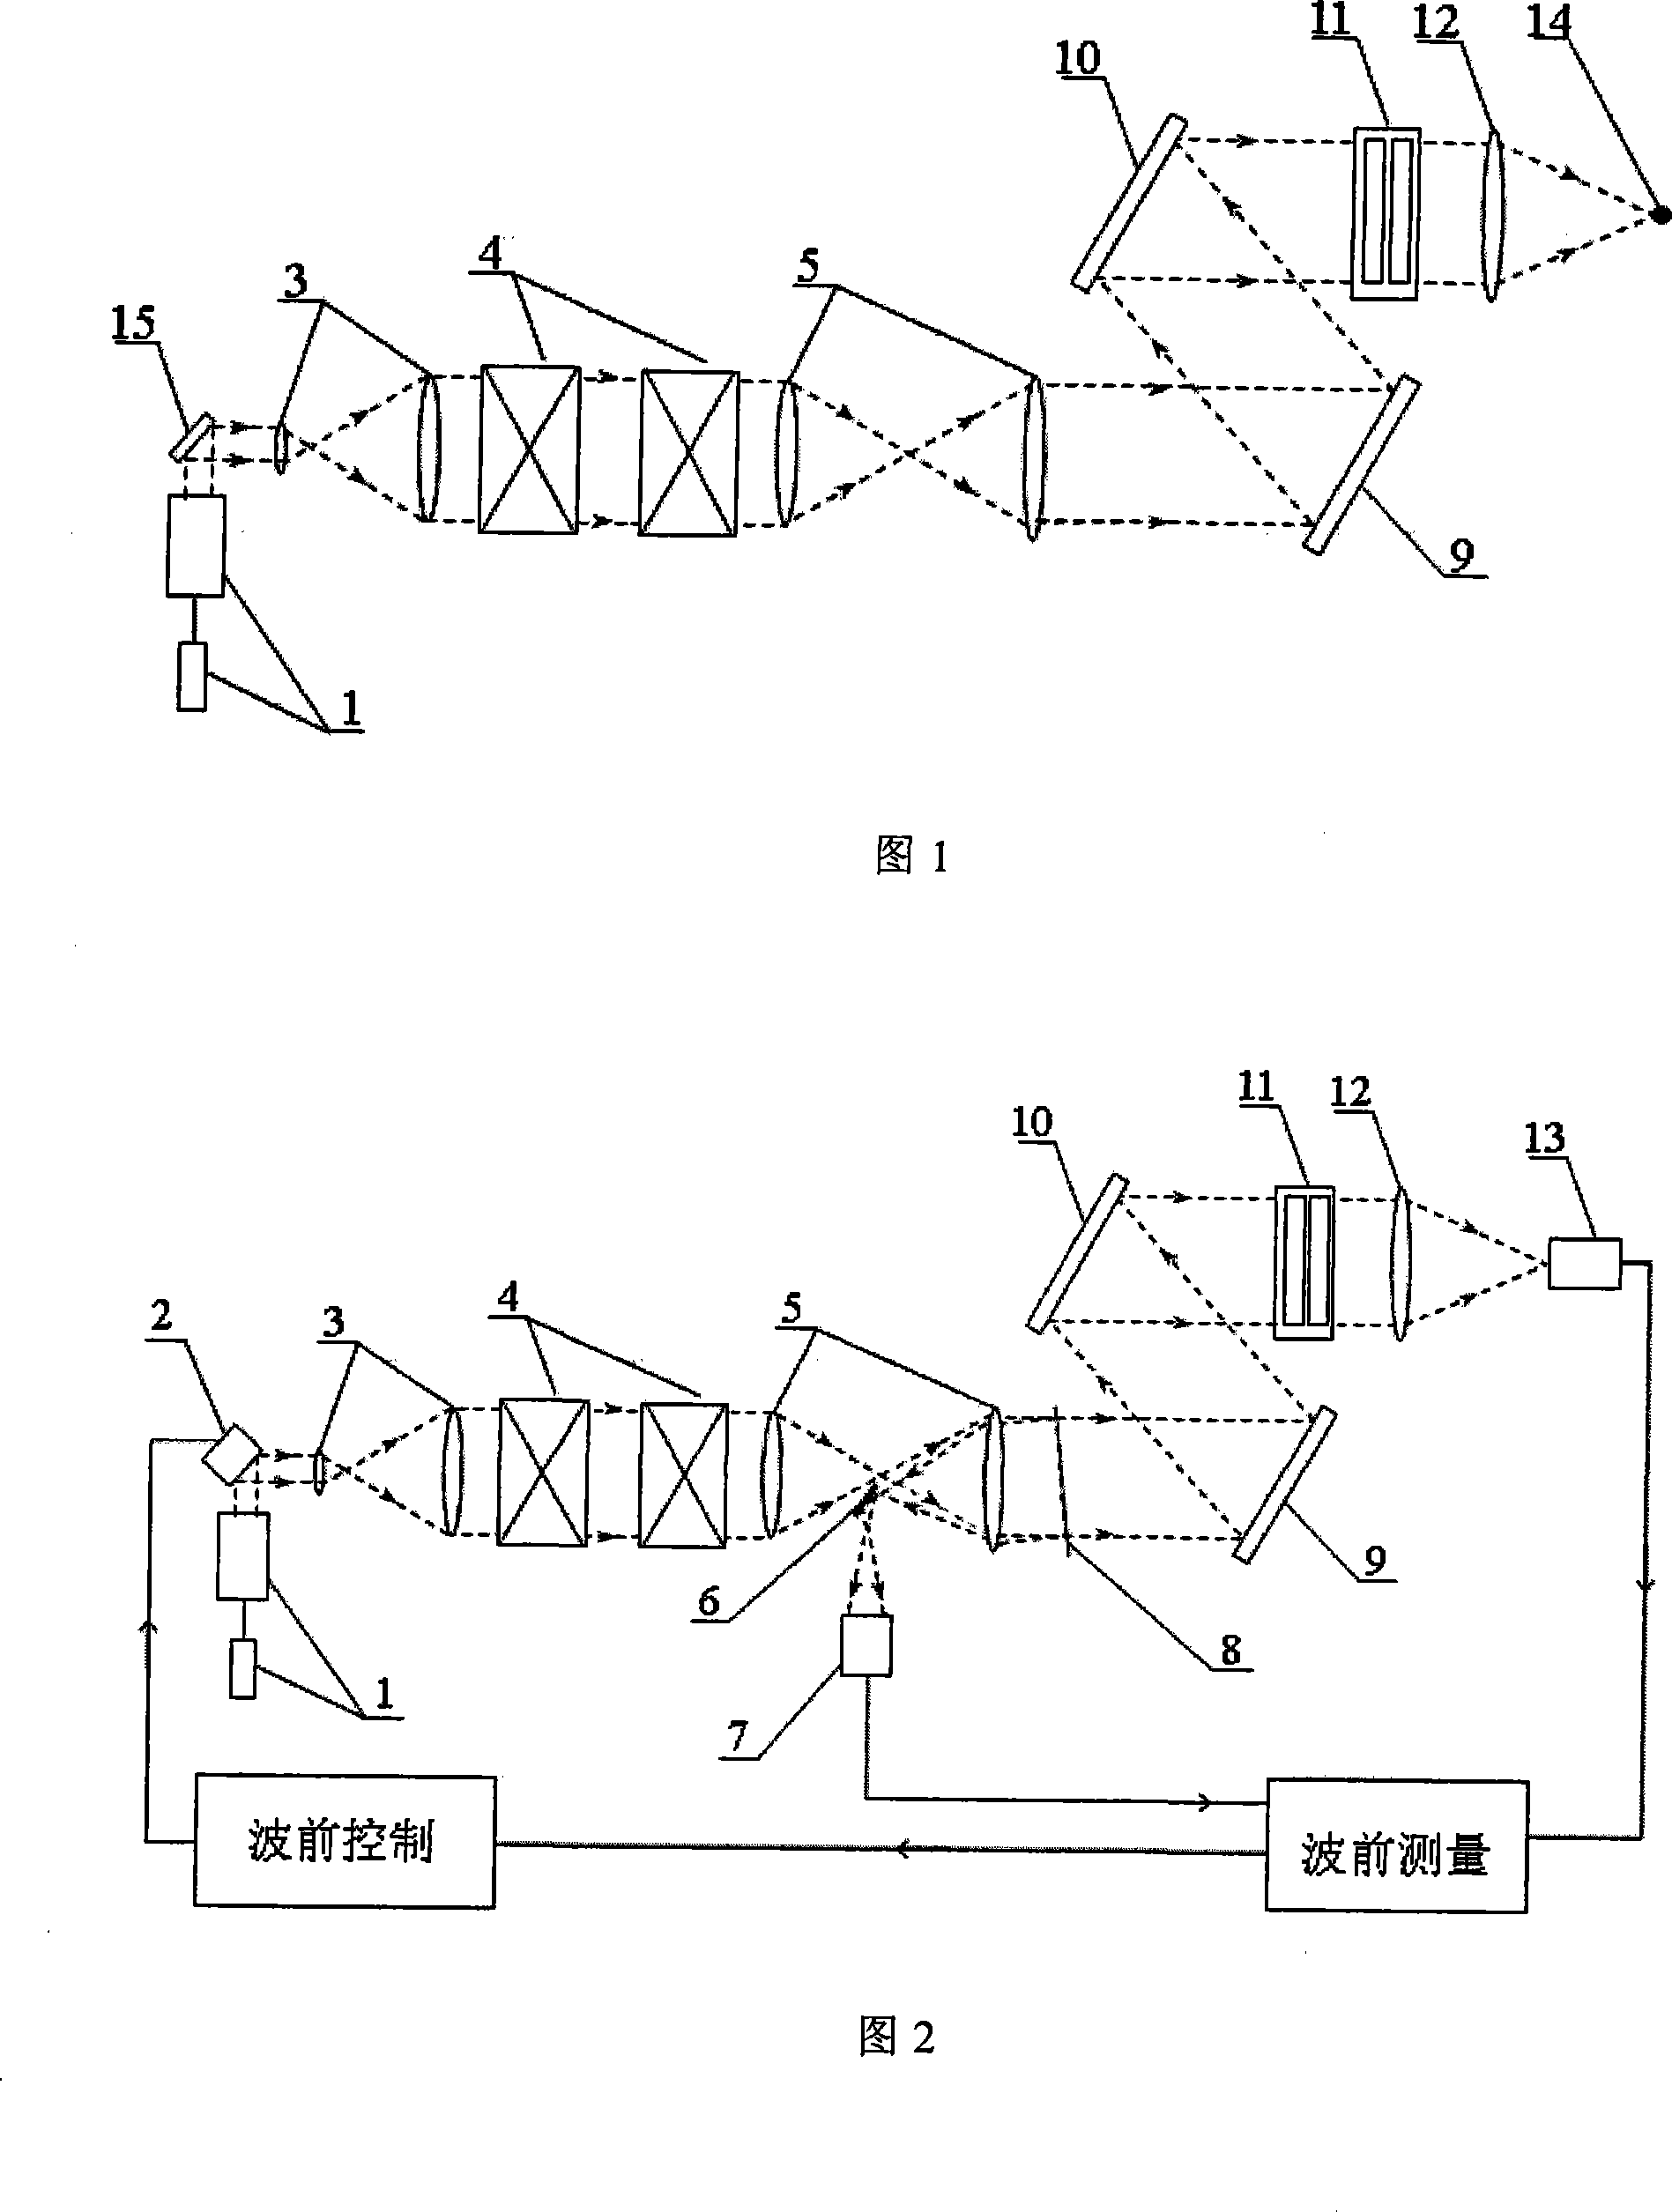 Measurement and correction method for inertia confinement complete light path aberration of fusion device